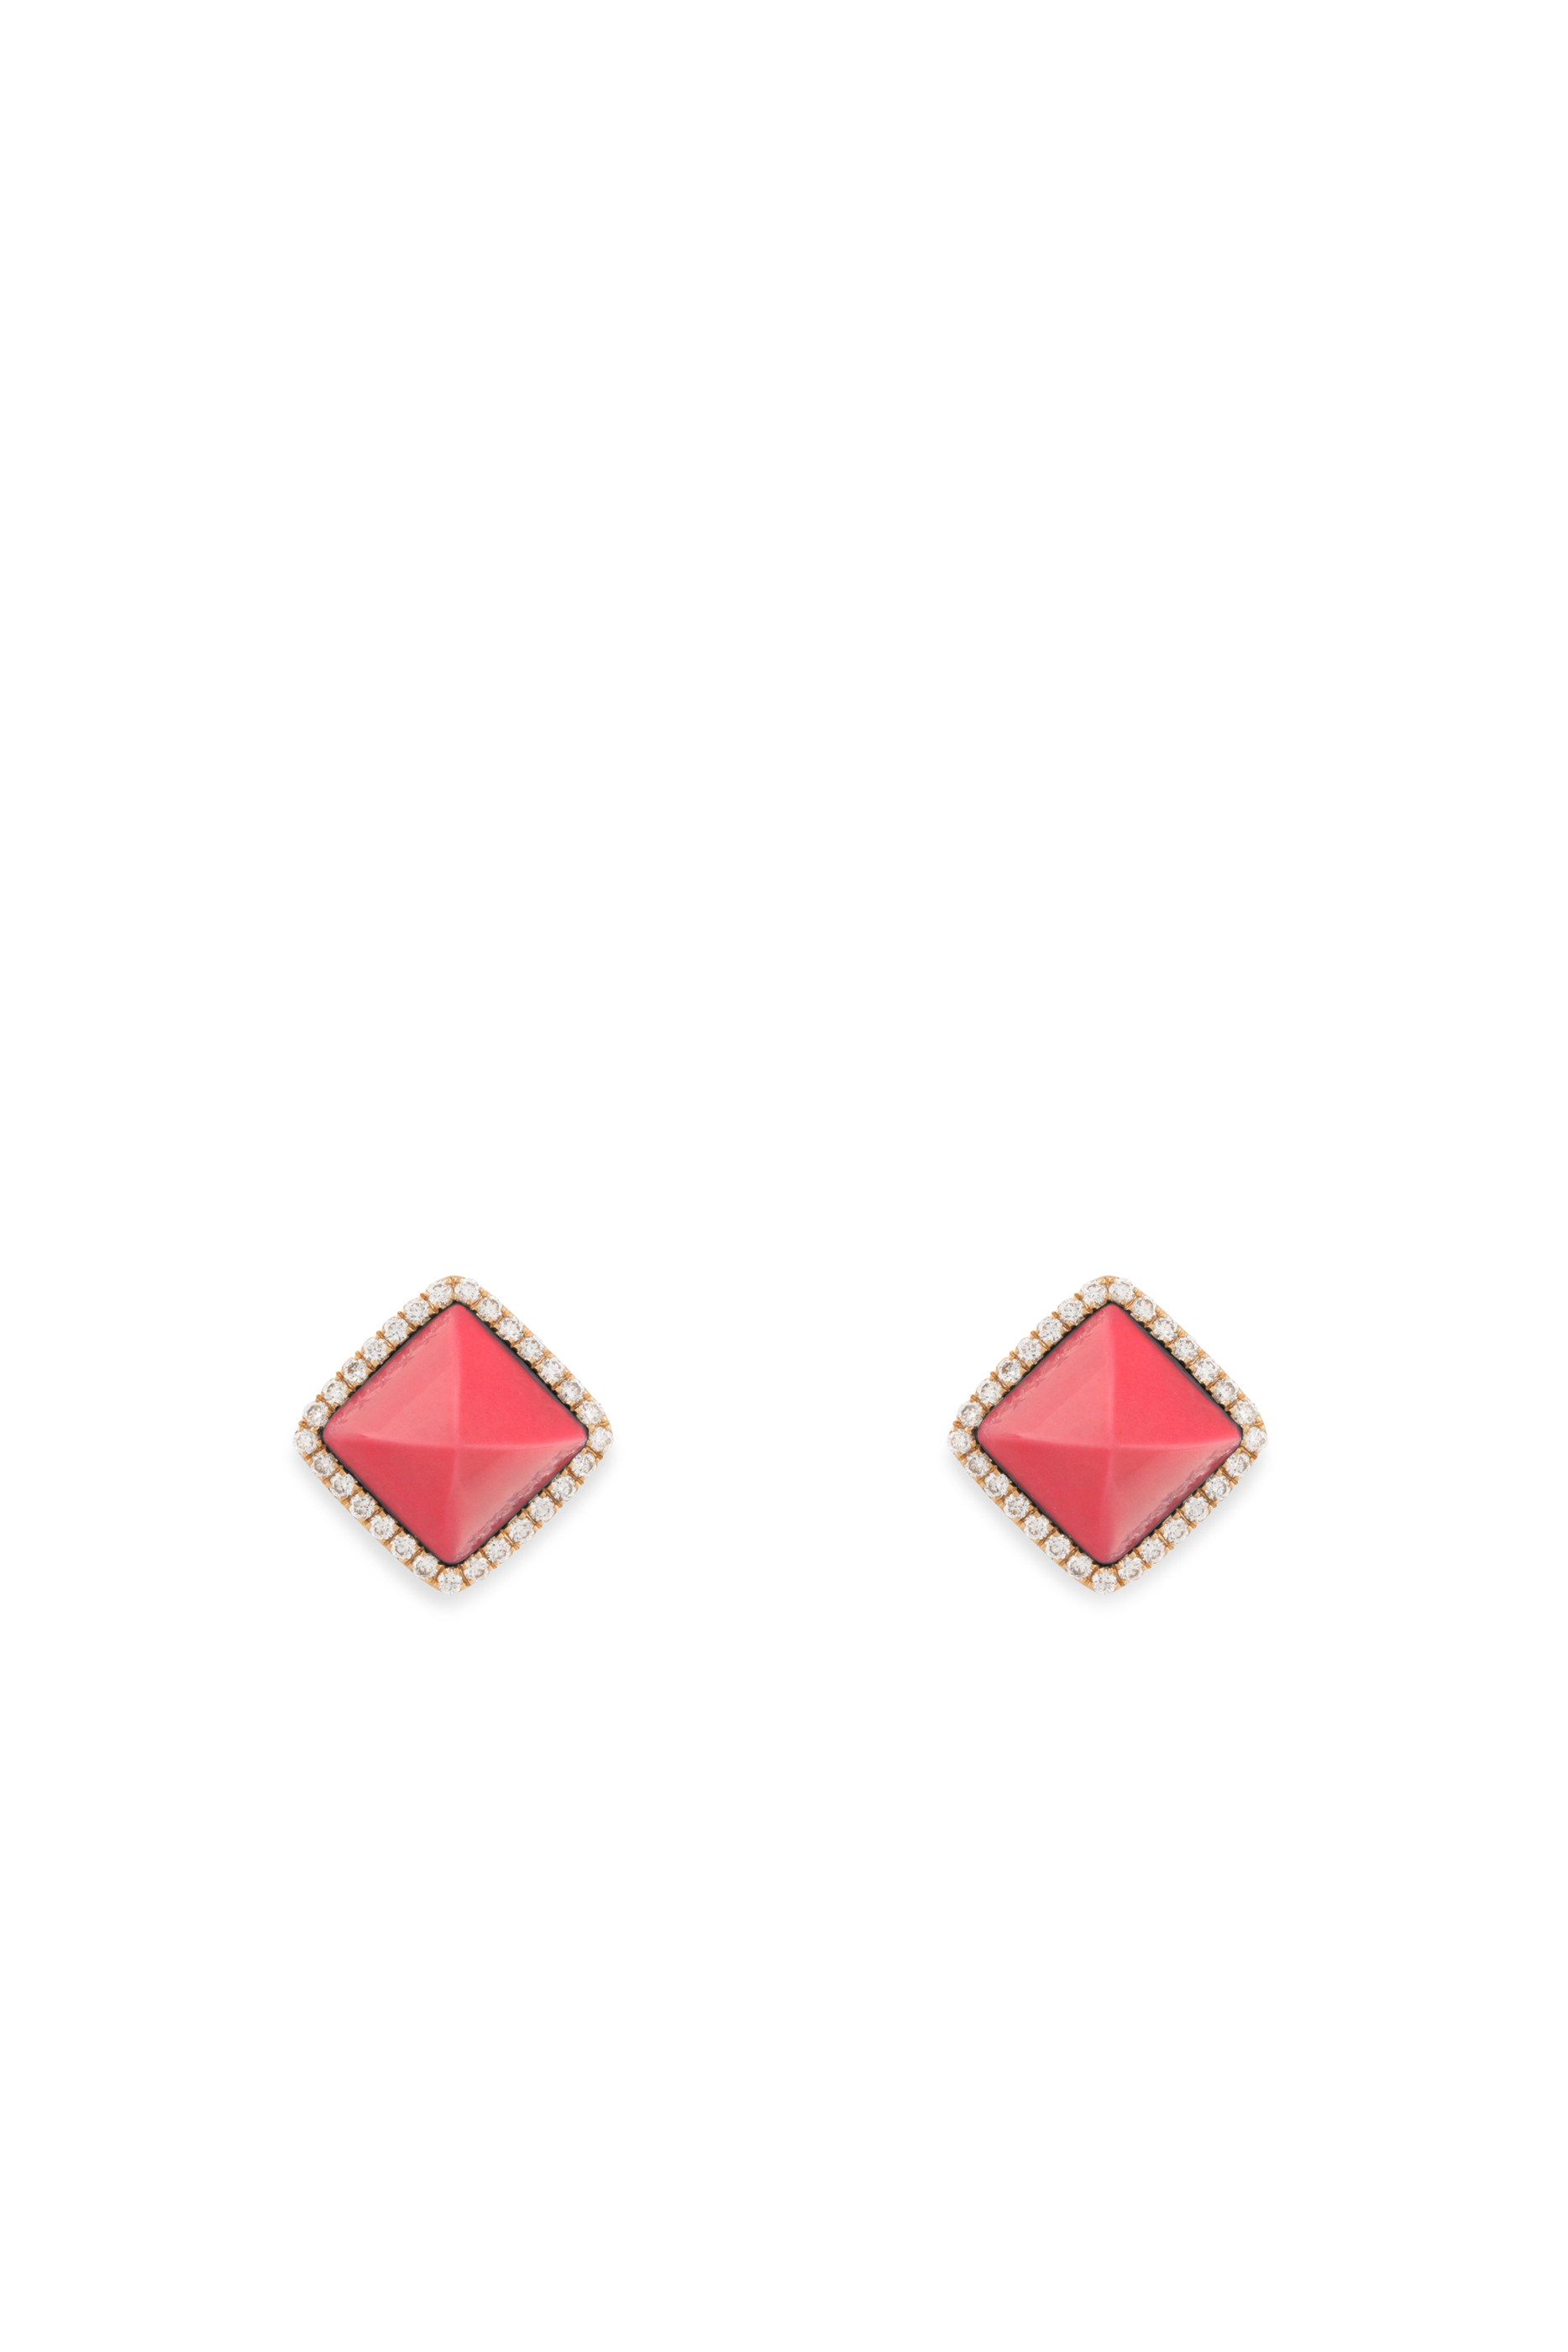 Buy Marli Cleo Pyramid Stud Pink Coral & Rose Gold Earrings for Womens ...